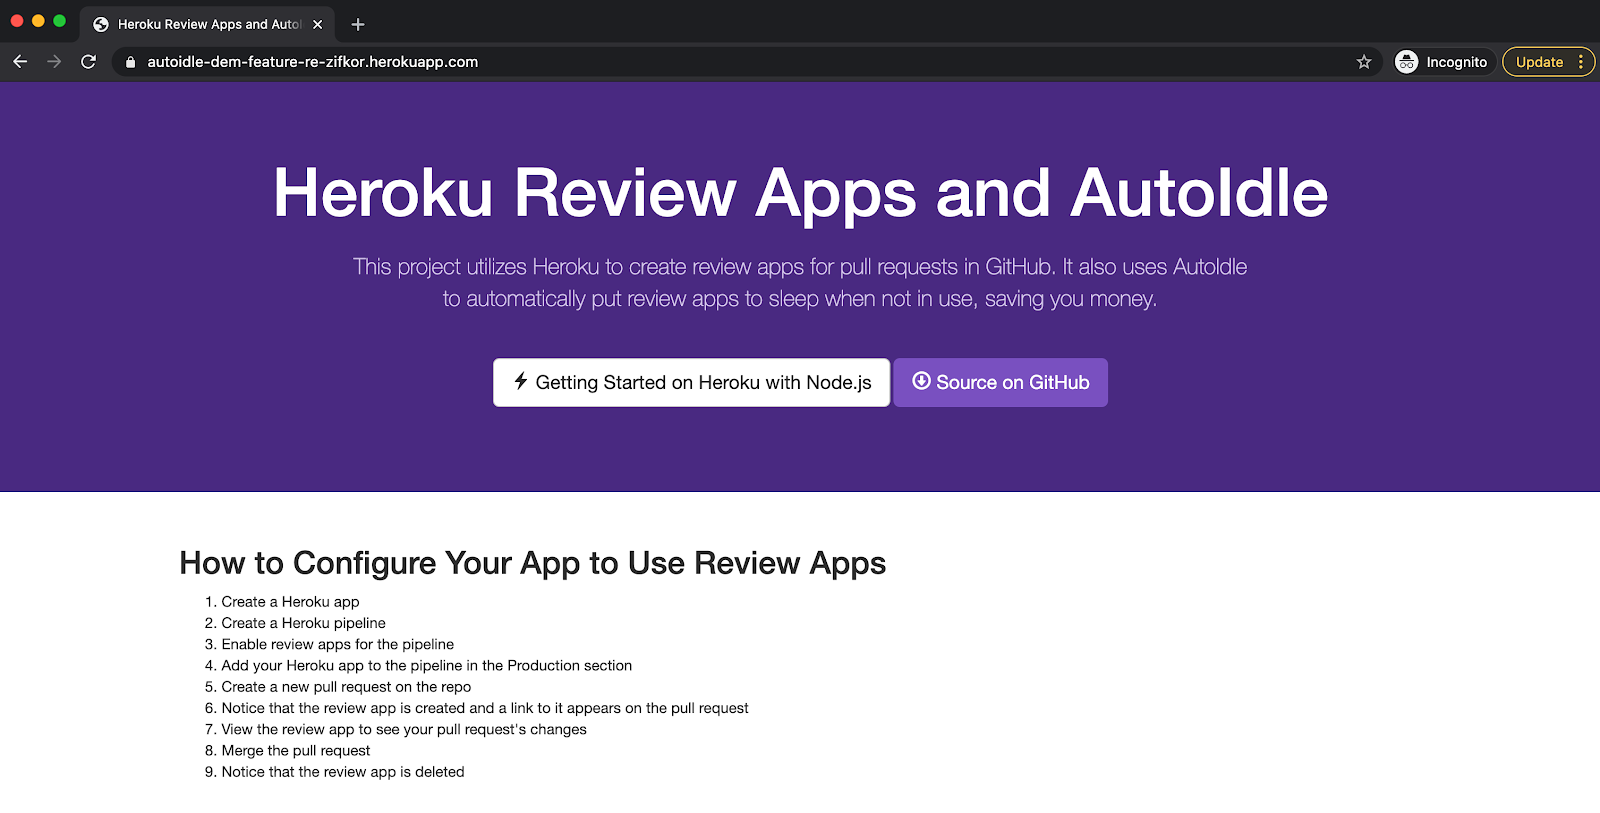 Our review app is awake and active again